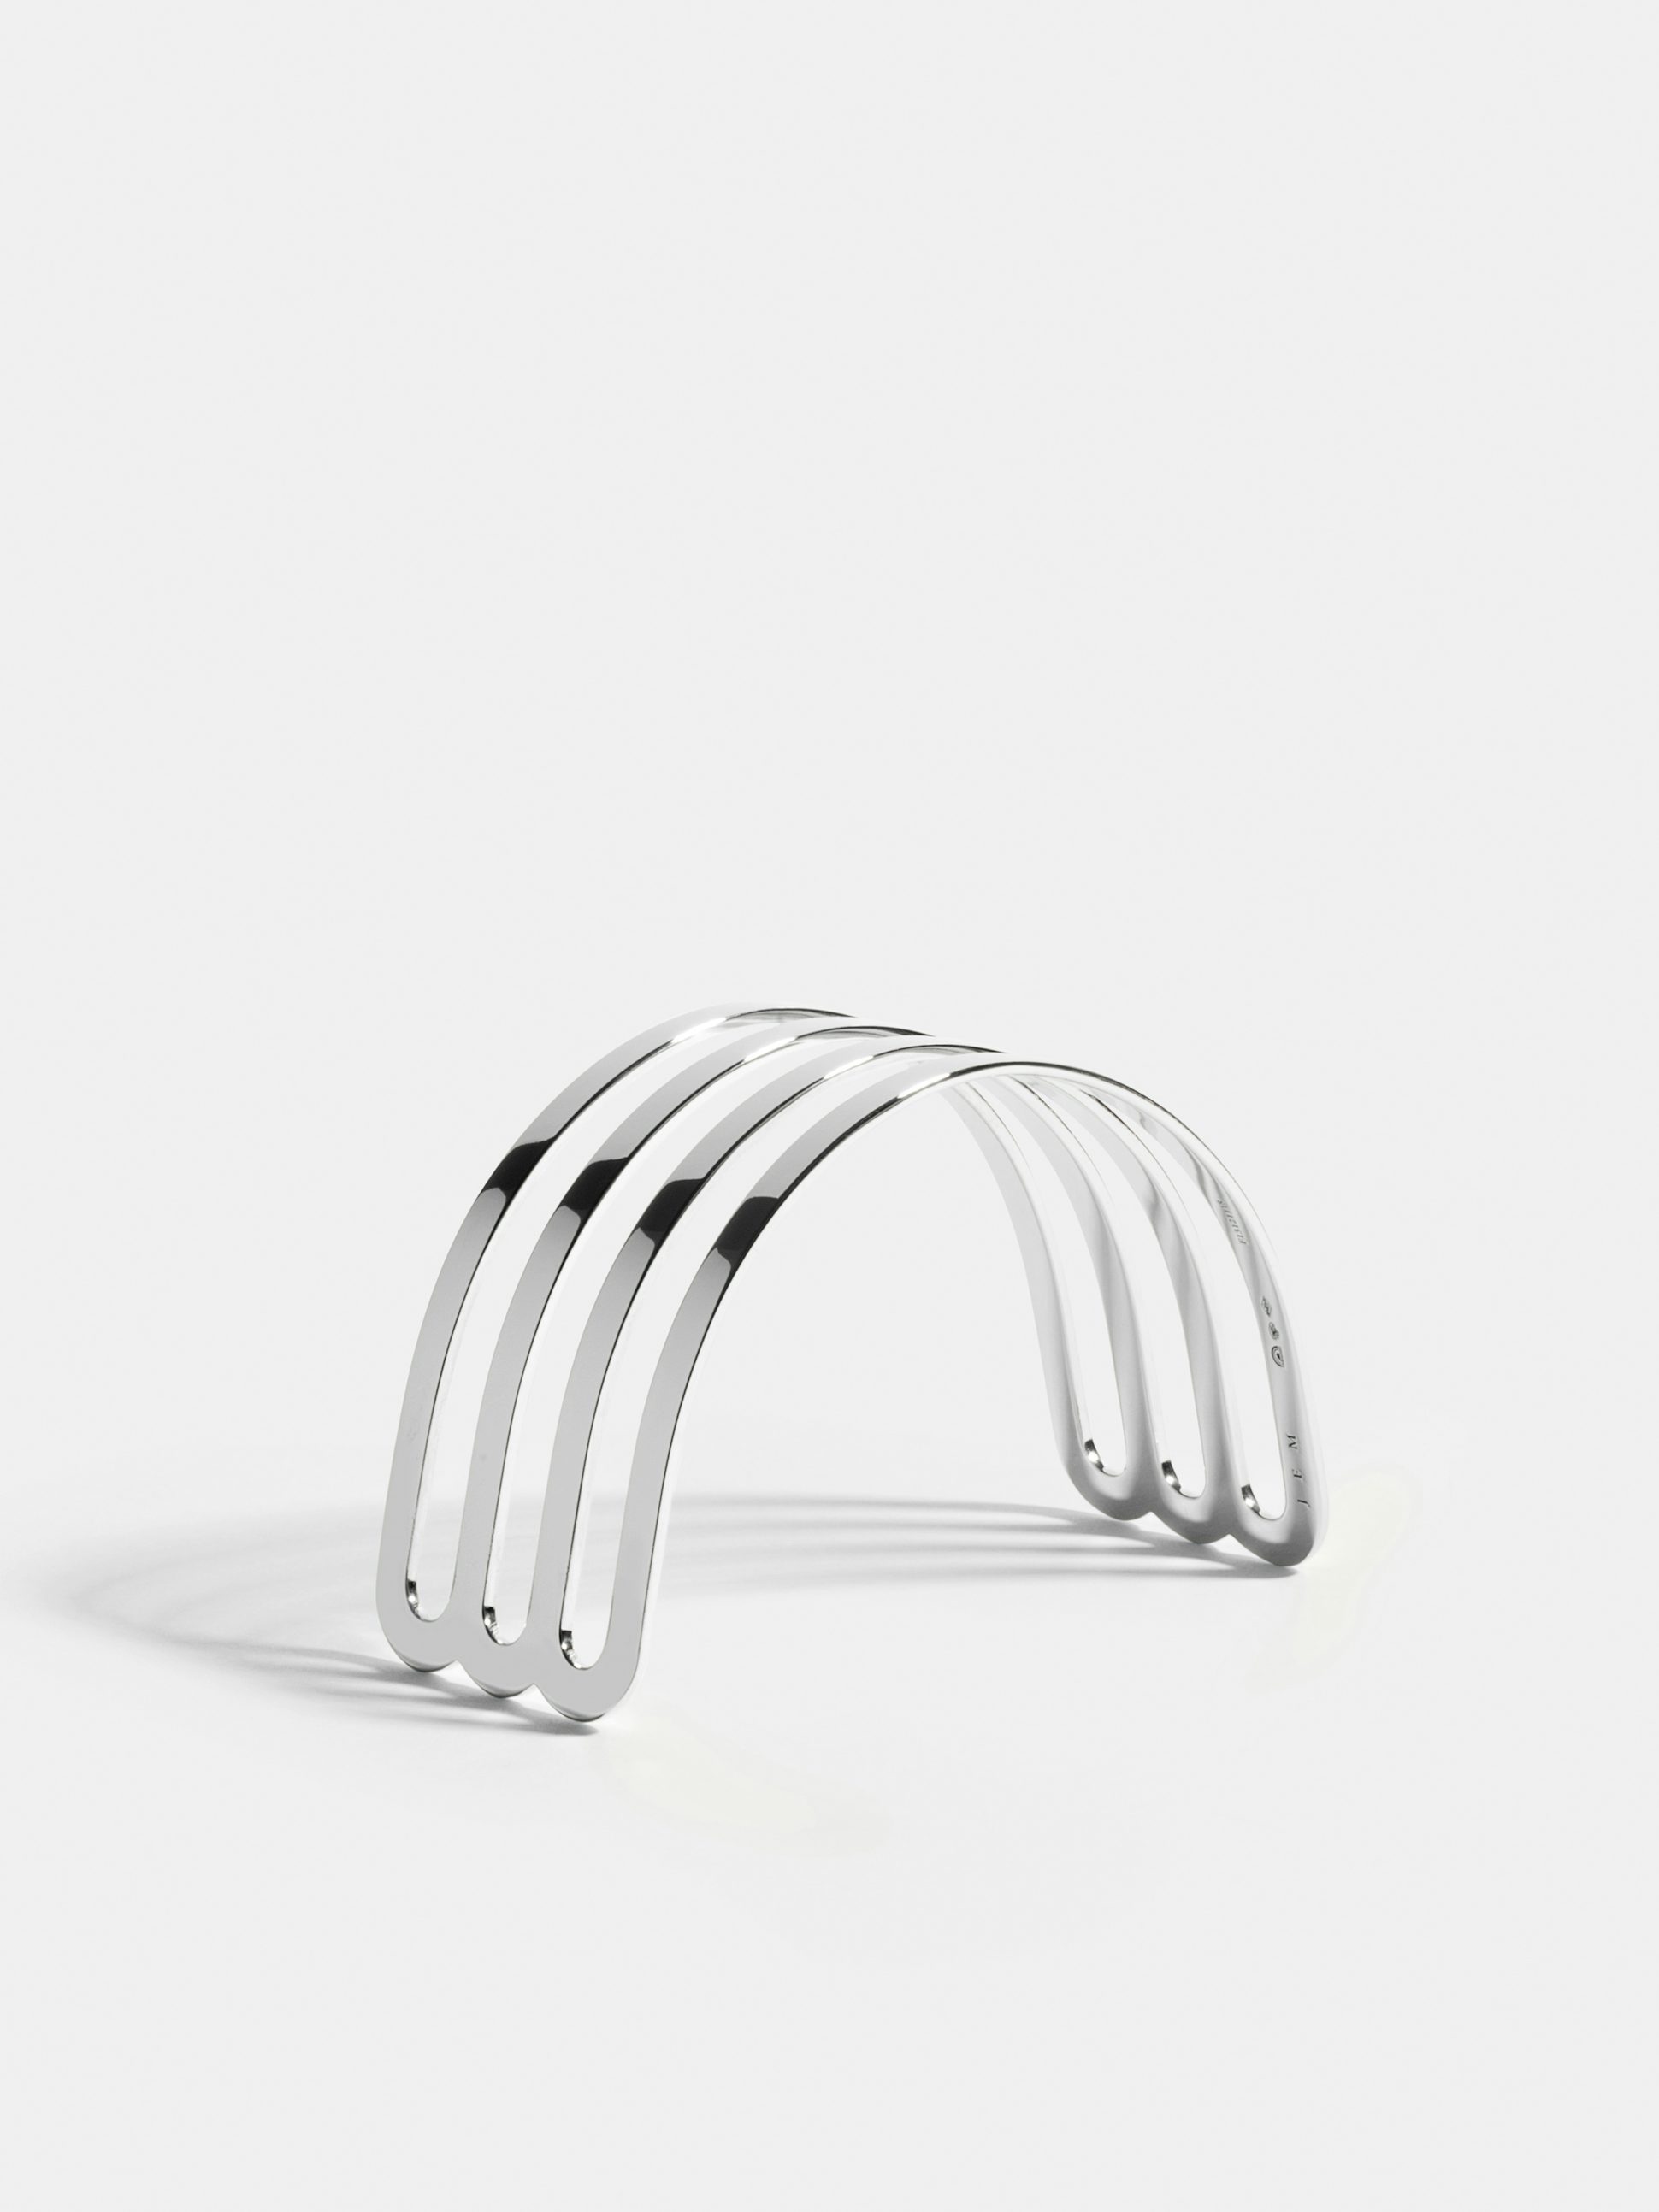 Étreintes triple half-bracelet in 18k Fairmined ethical white gold with a polished finish.